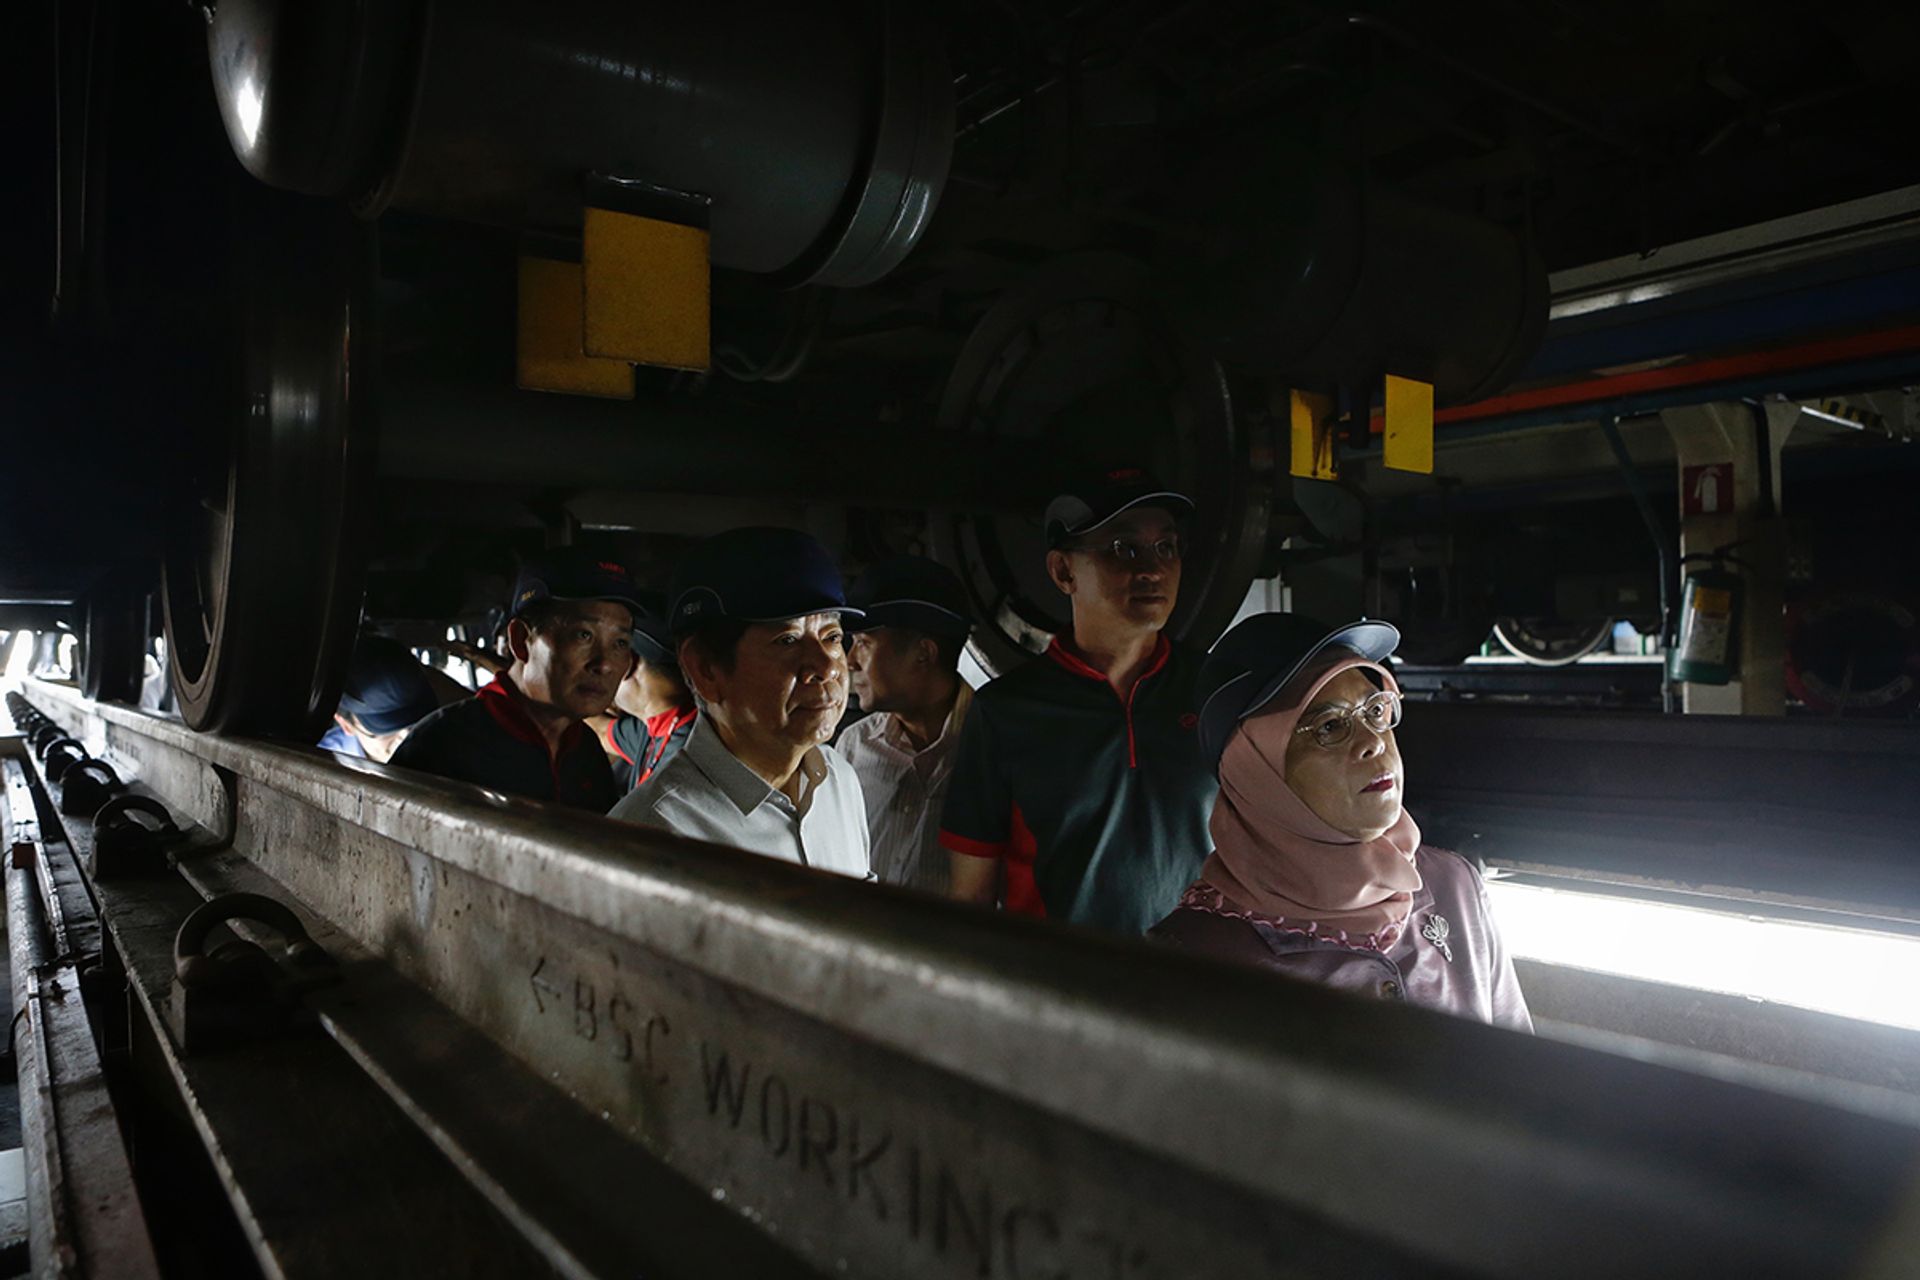 President Halimah observing maintenance work done on the undercarriage of a train from the maintenance pit during her visit to SMRT’s Bishan Depot on March 14, 2018. ST PHOTO: KEVIN LIM